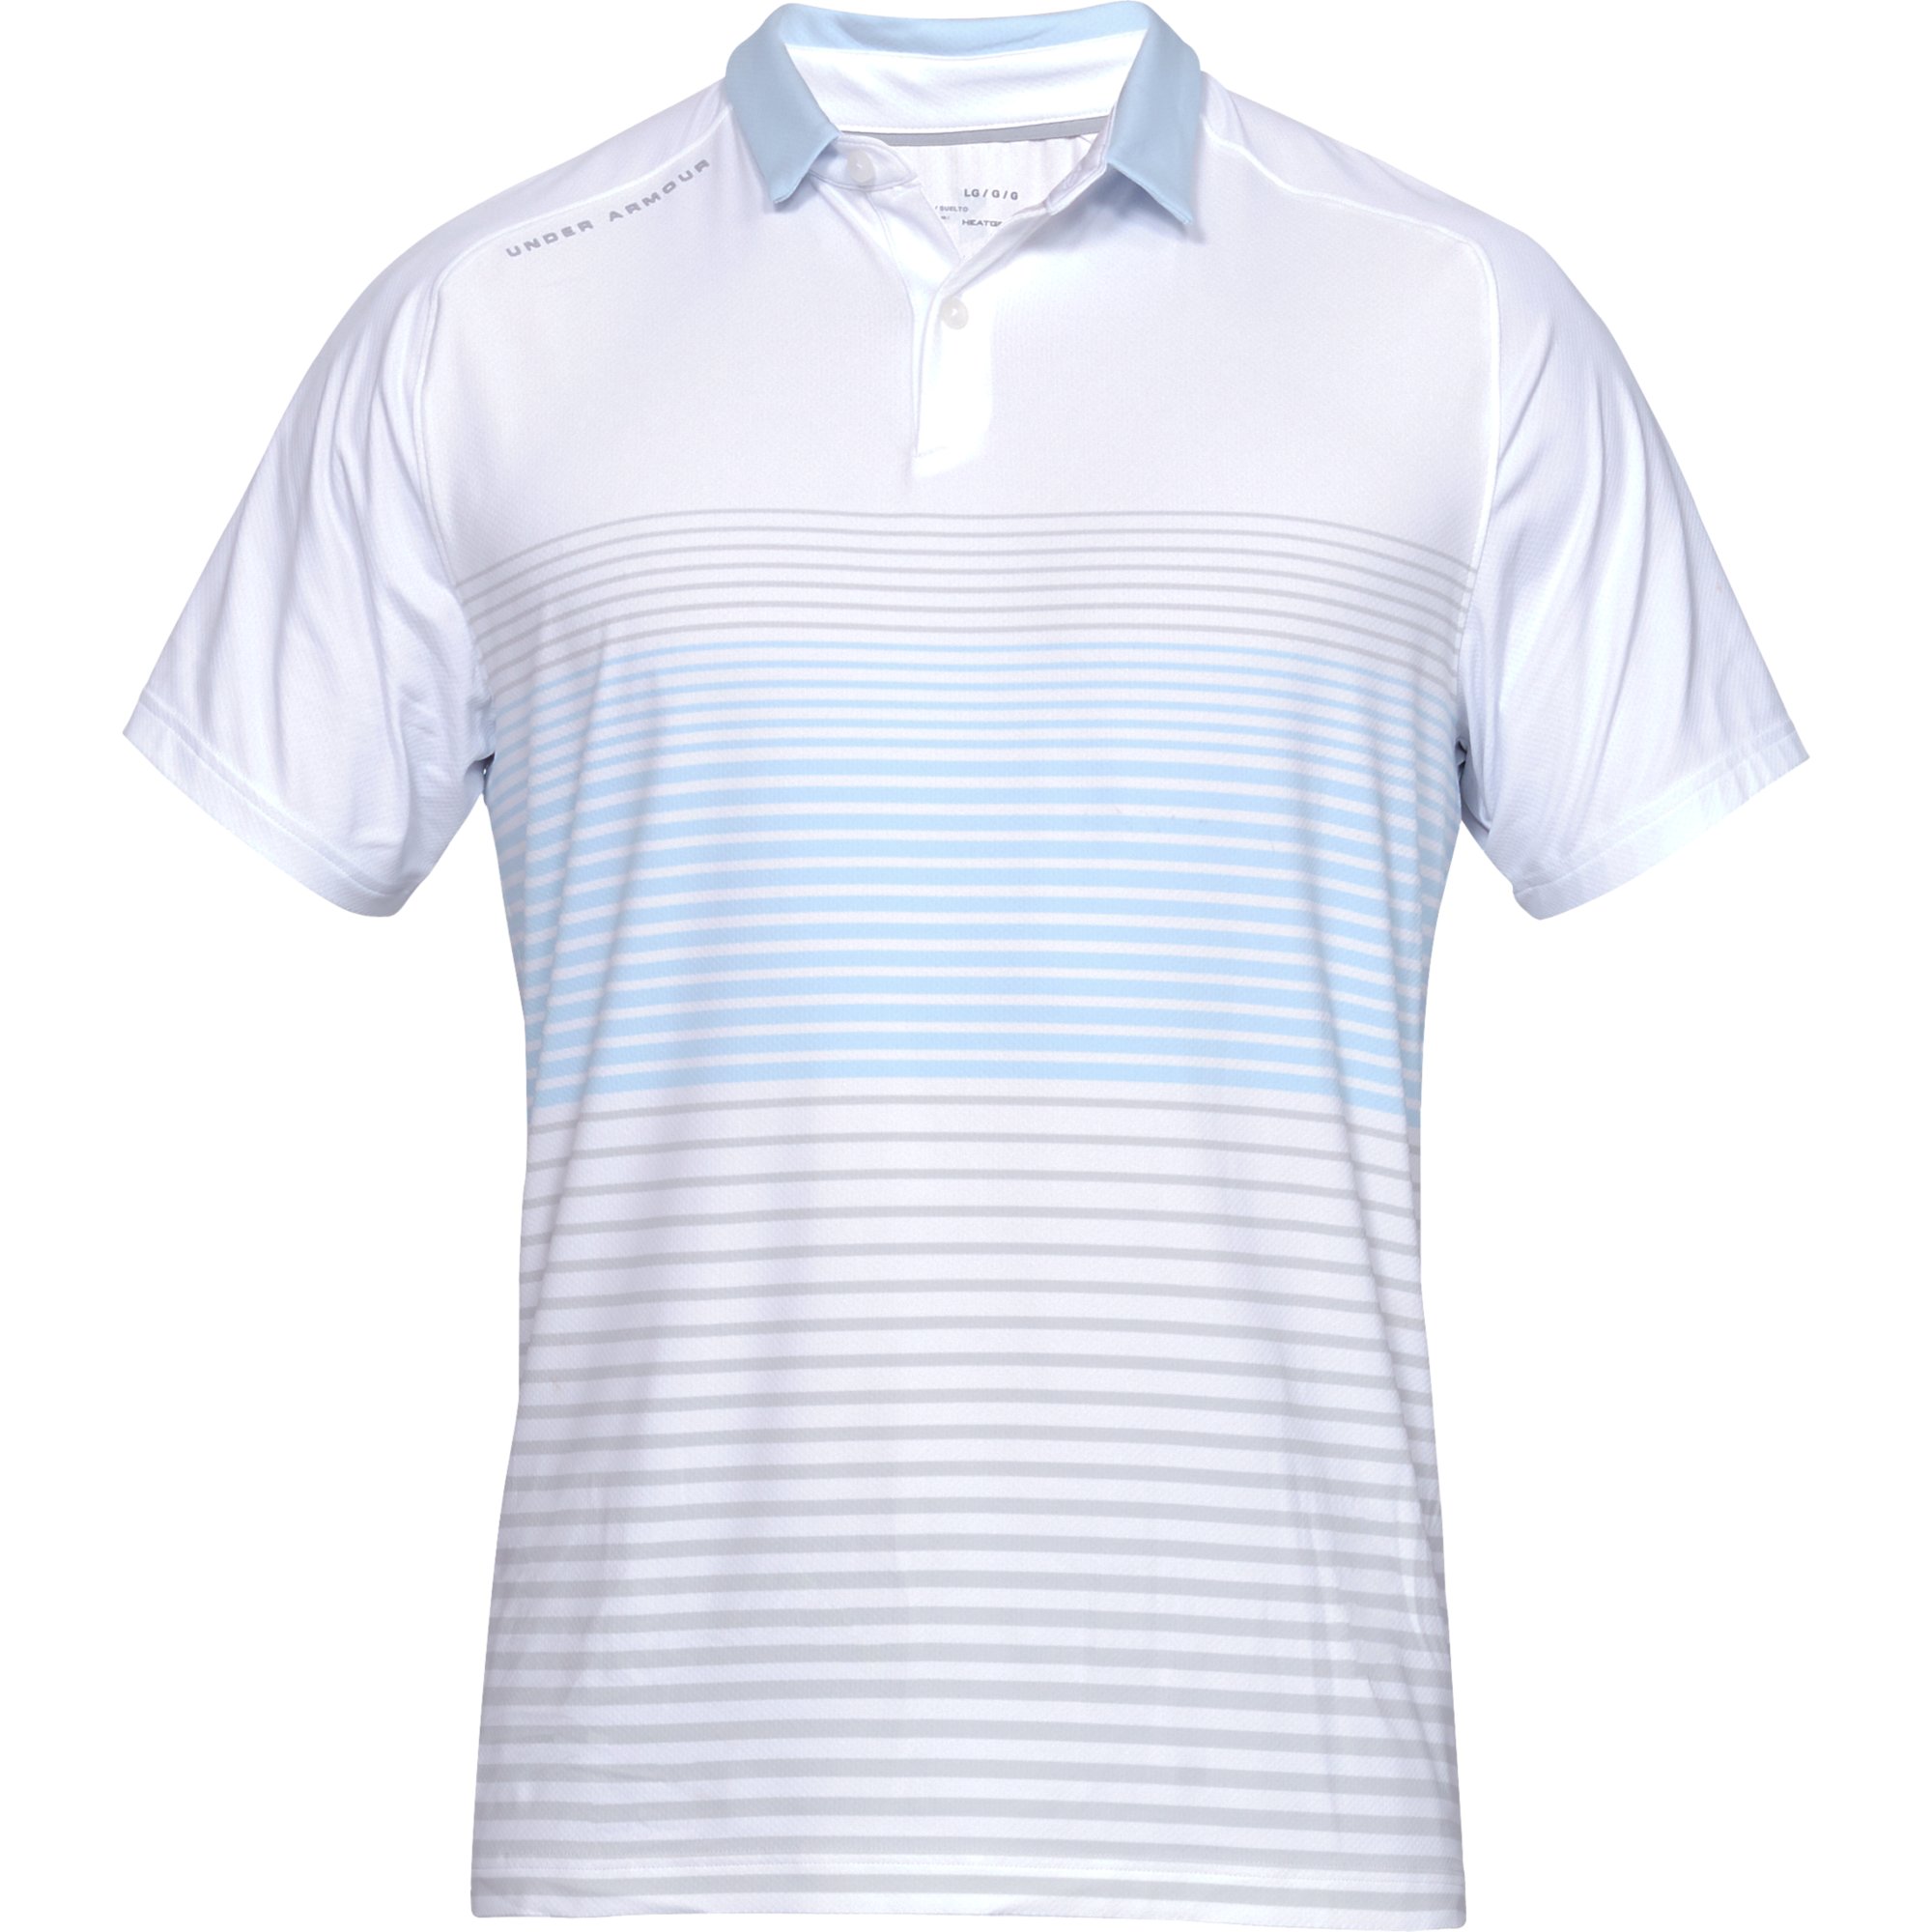 golf clothing under armour